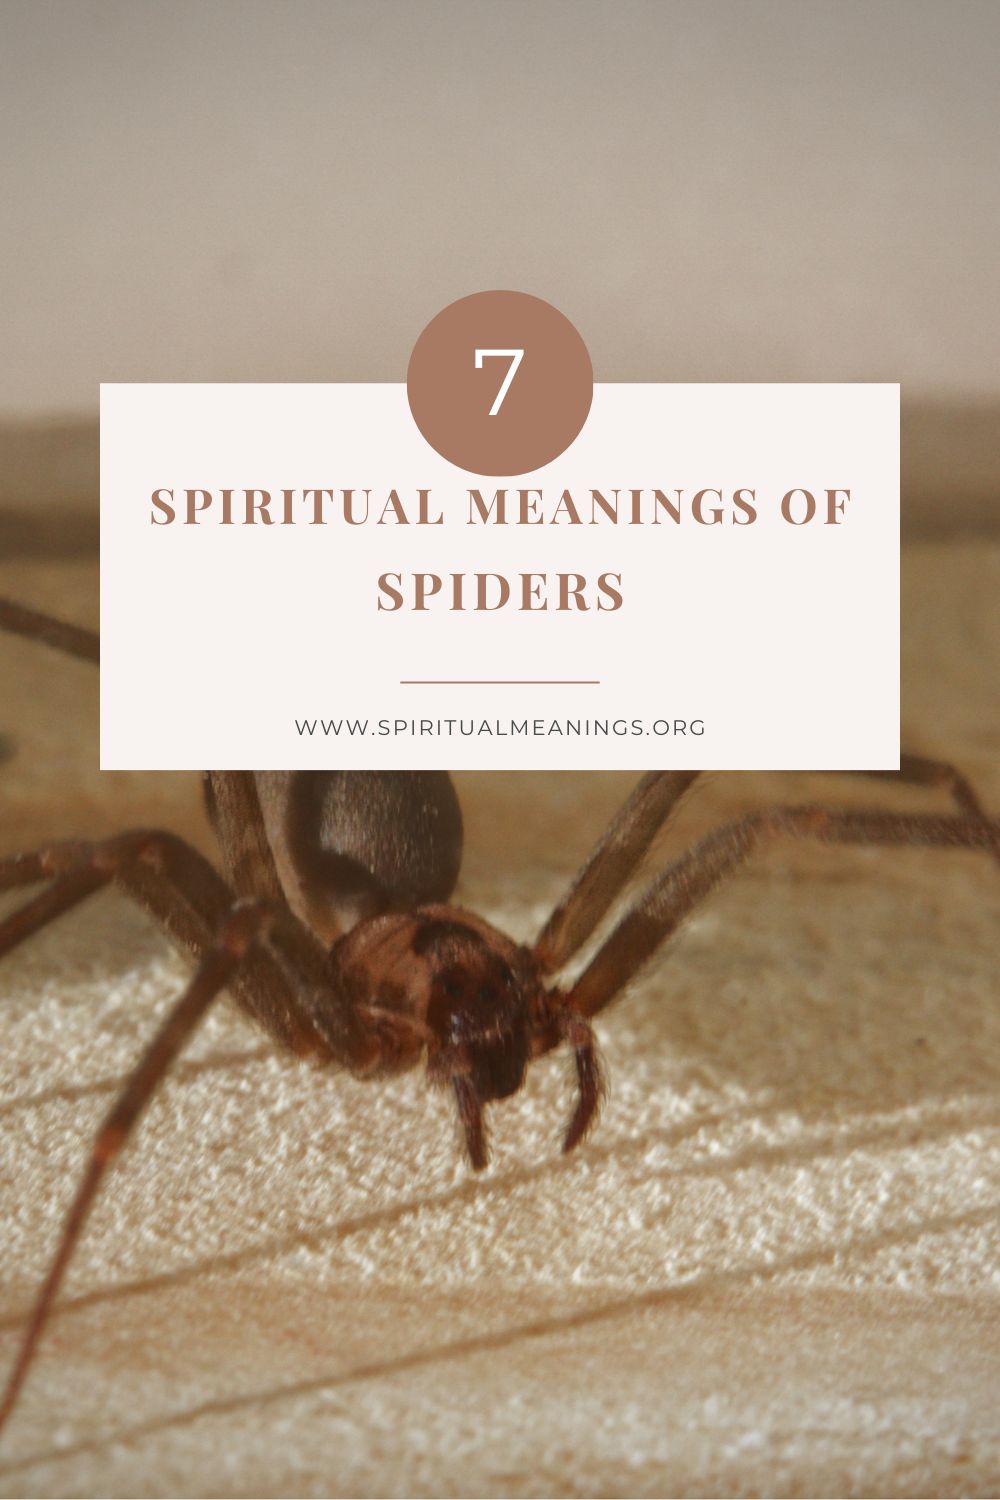 Finding the Spiritual Meaning of Spiders